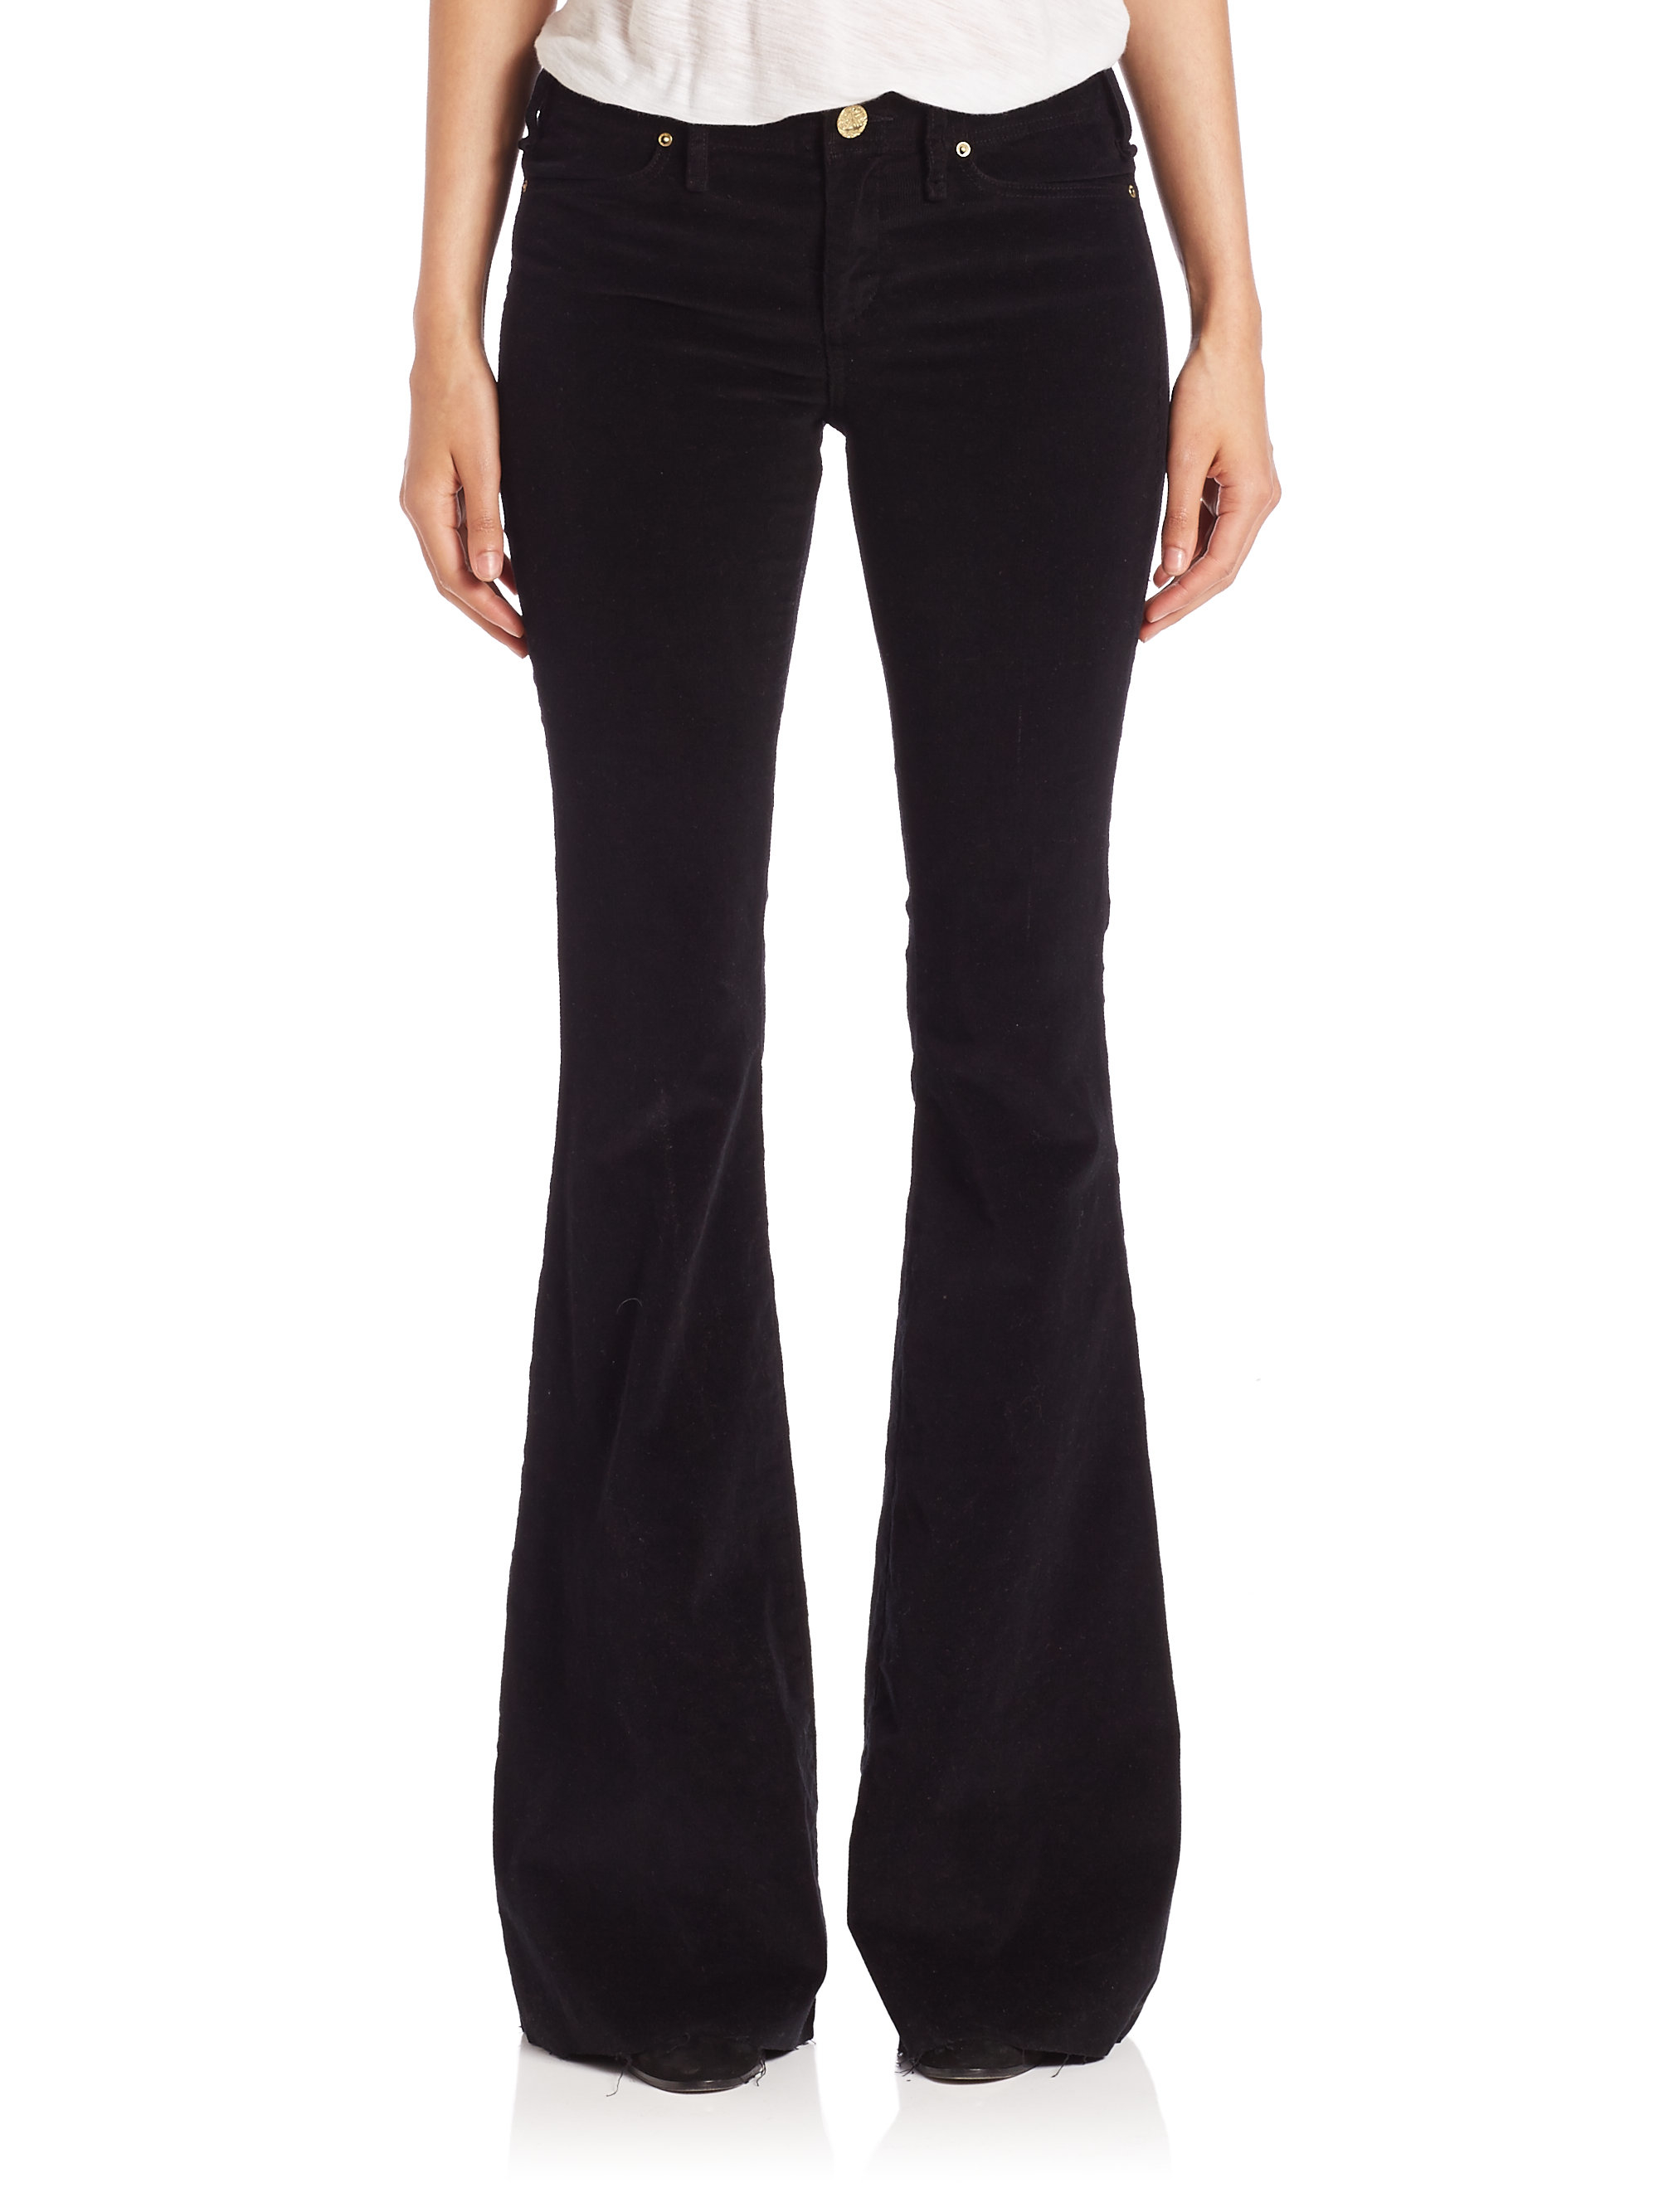 Lyst - Mcguire Charlemagne Corduroy Flared Jeans in Black